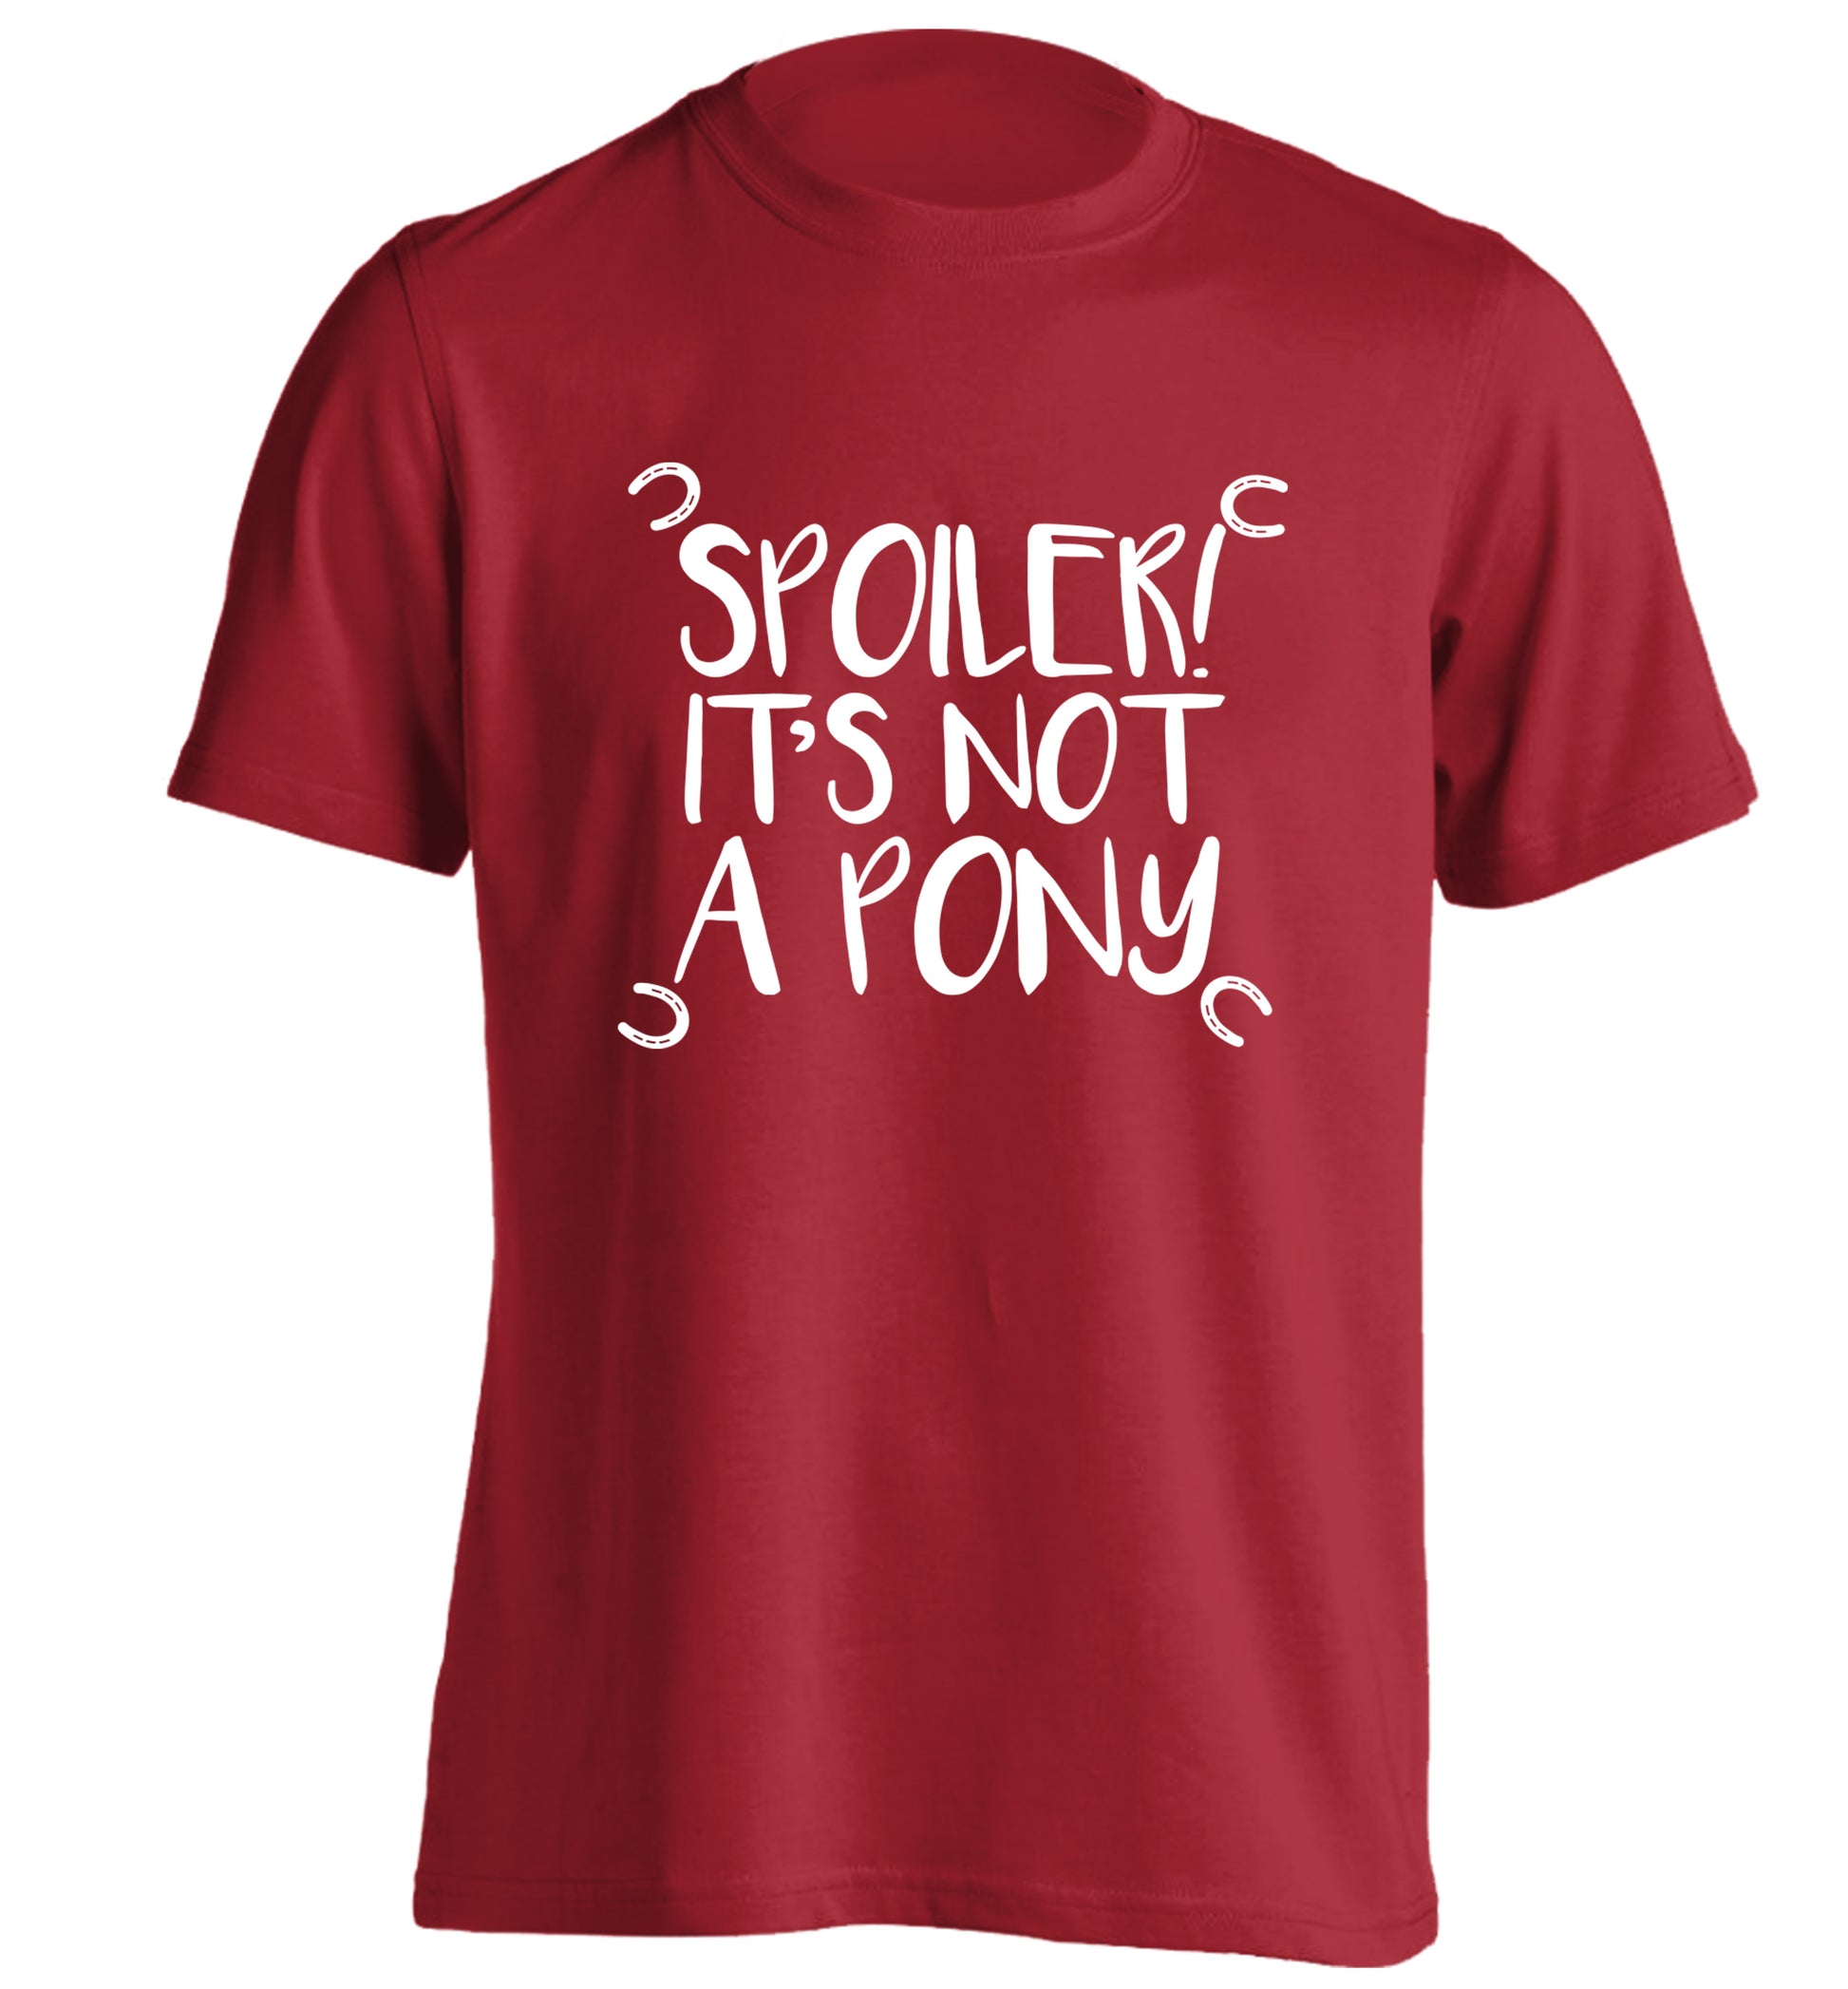 Spoiler it's not a pony adults unisex red Tshirt 2XL